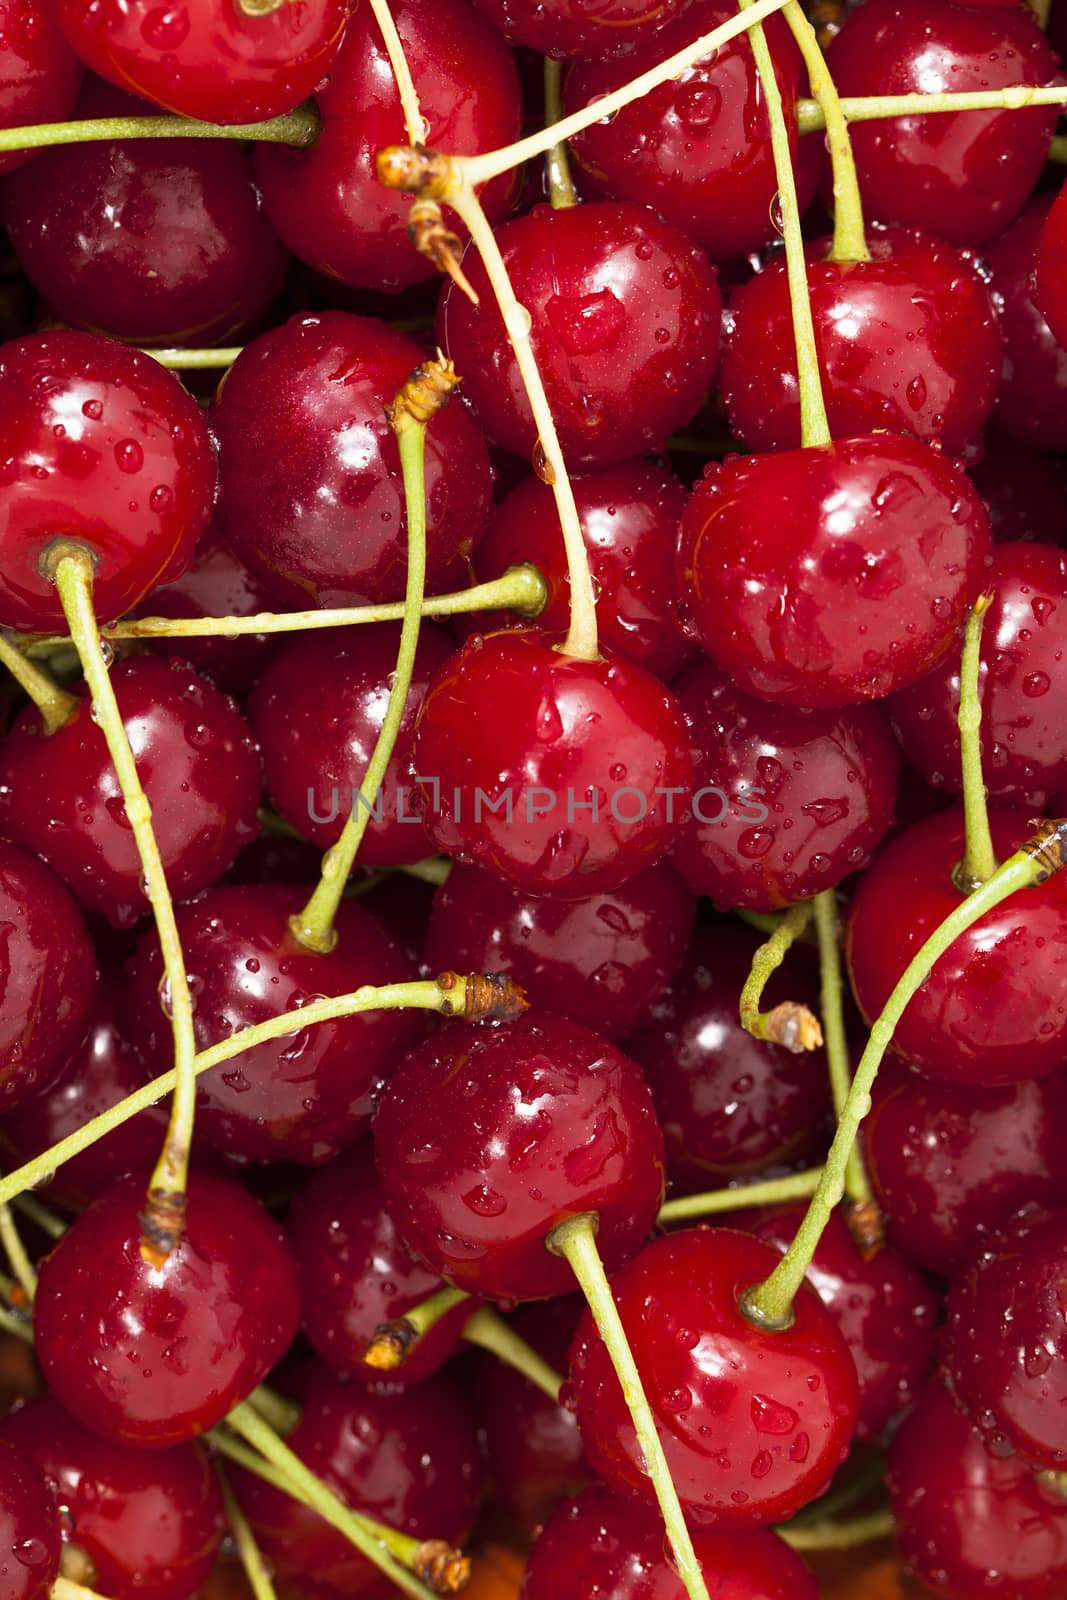   the ripe red cherries lying in a heap covered with drops of water